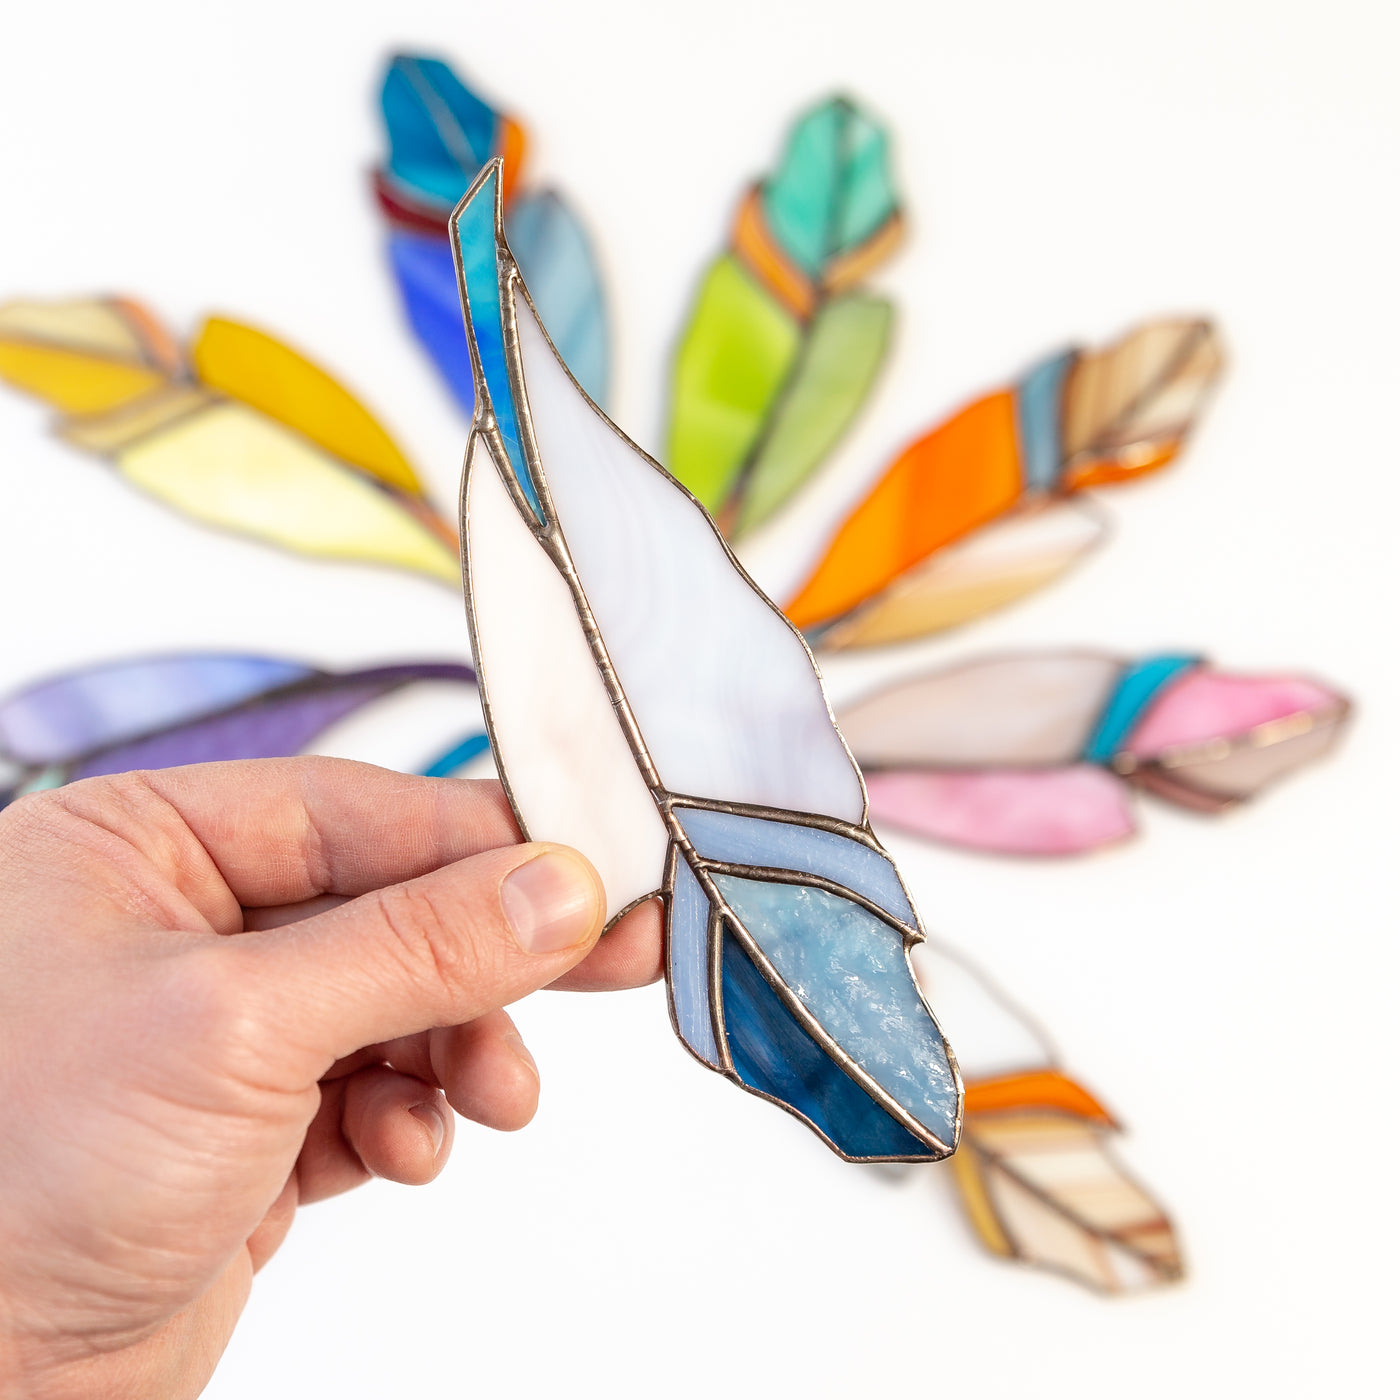 Suncatcher of a blue stained glass feather